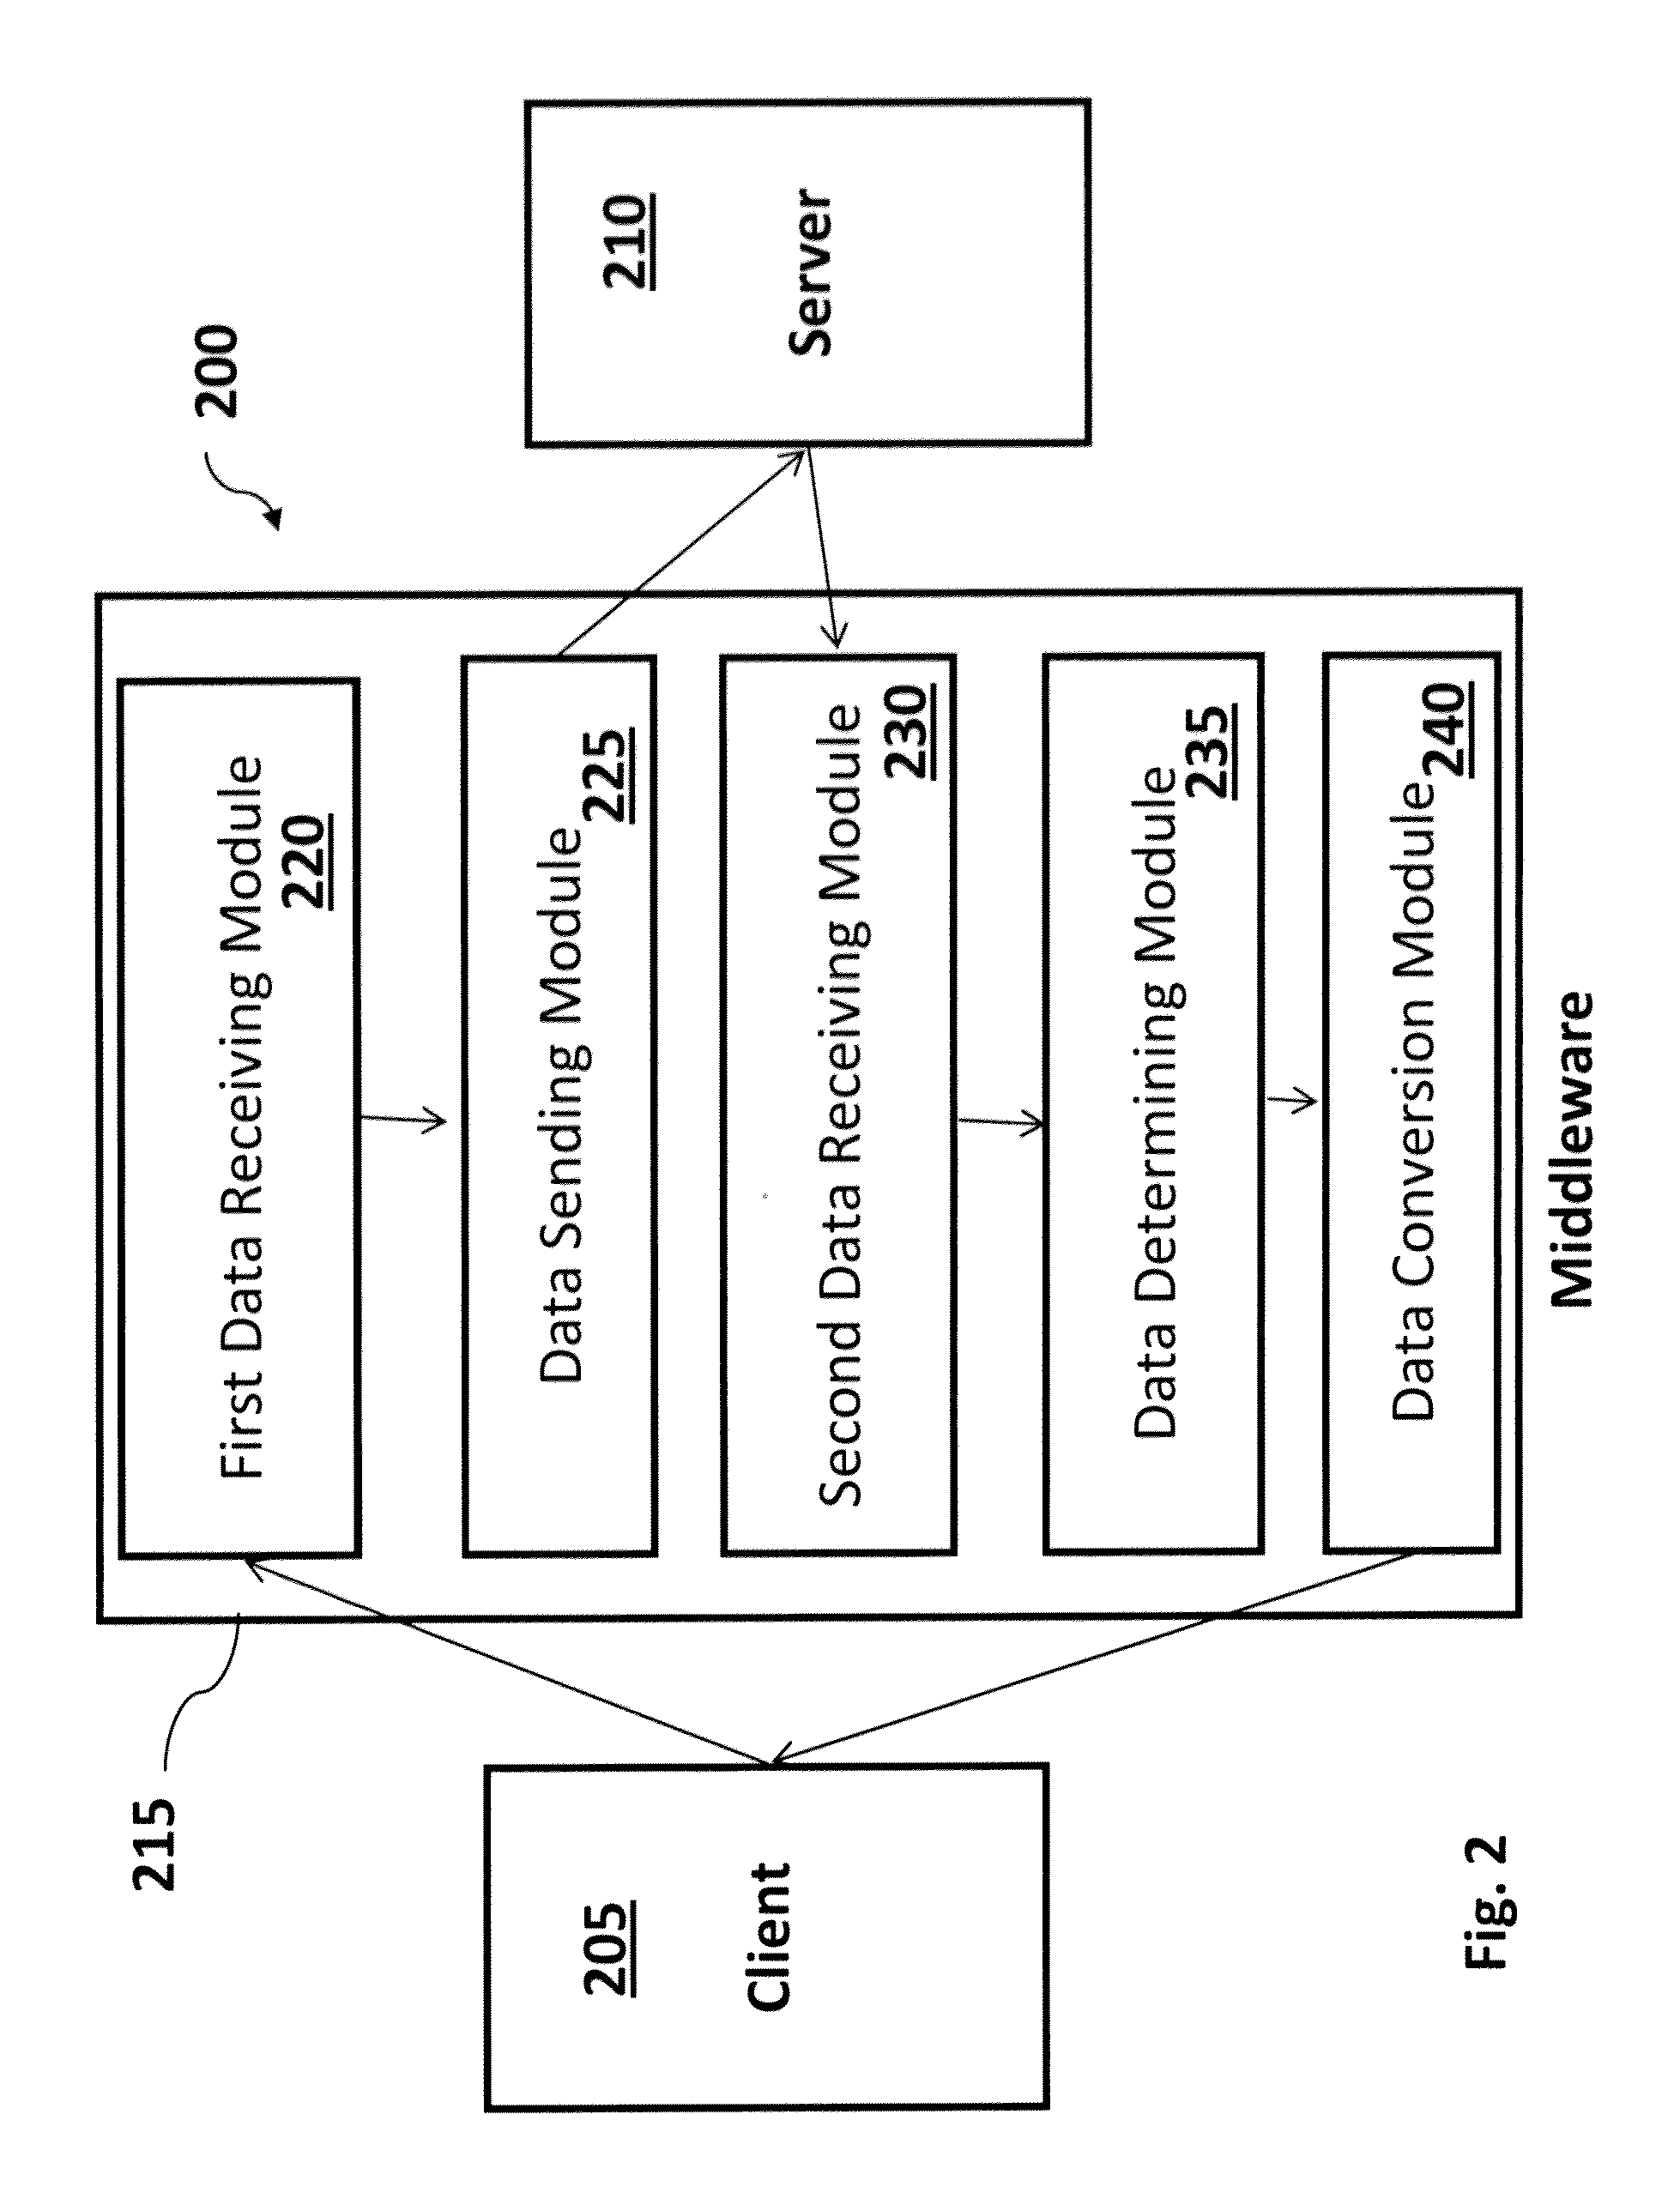 System and method for dynamic modification of web page content to ensure consistent response time